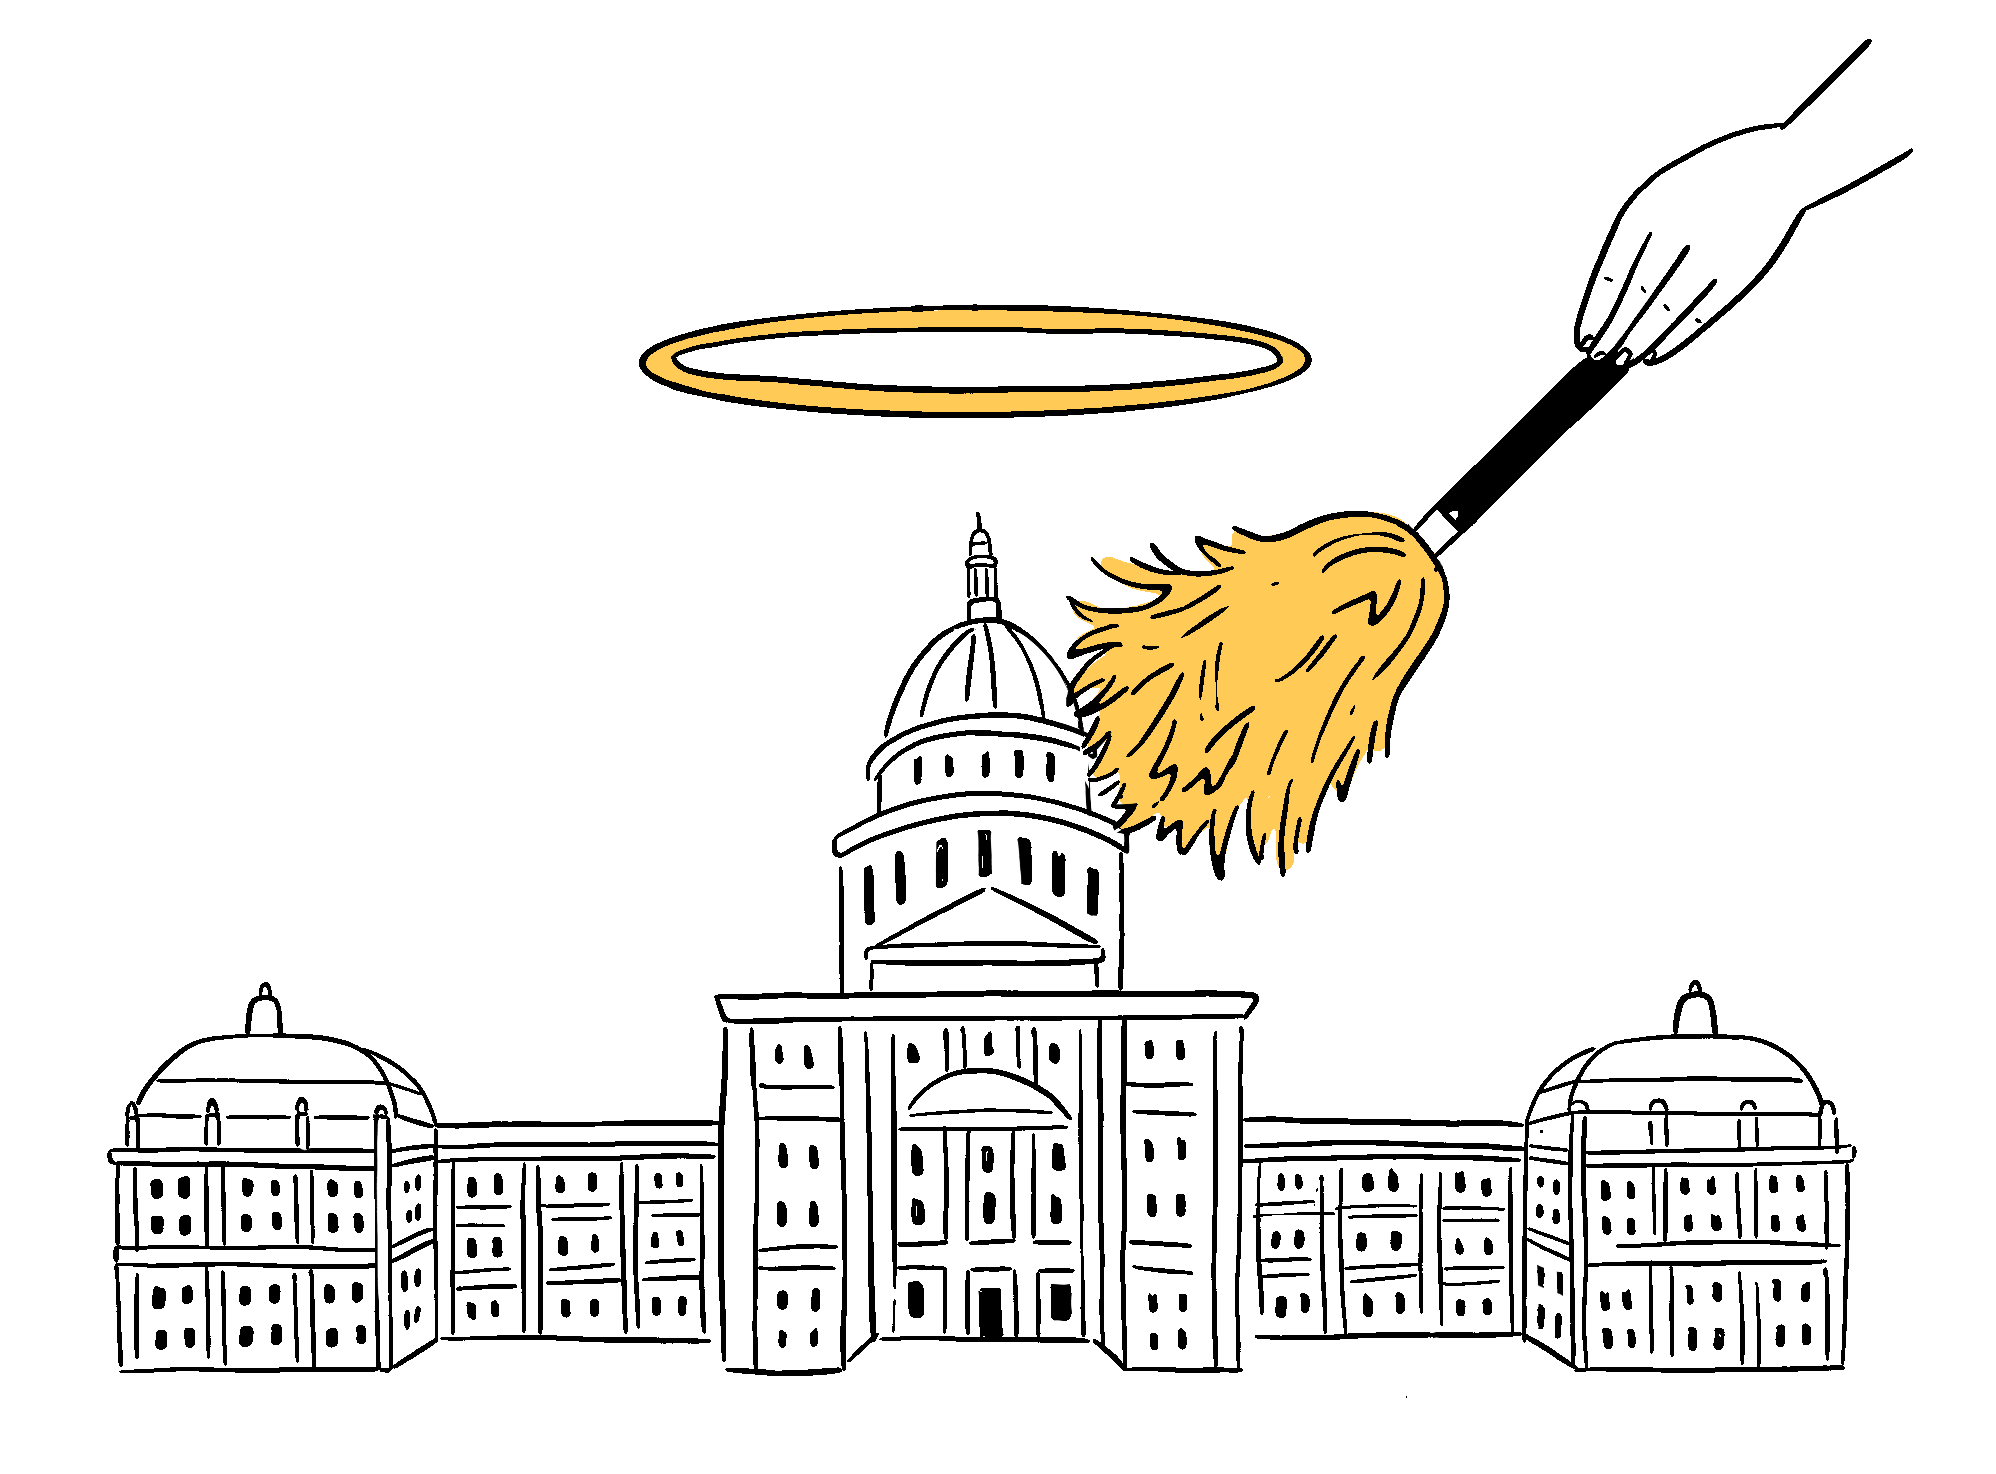 An animation of the Texas Capitol building, with a glowing golden halo over it, as a god-like hand reaches down to use a gigantic feather duster on the dome.